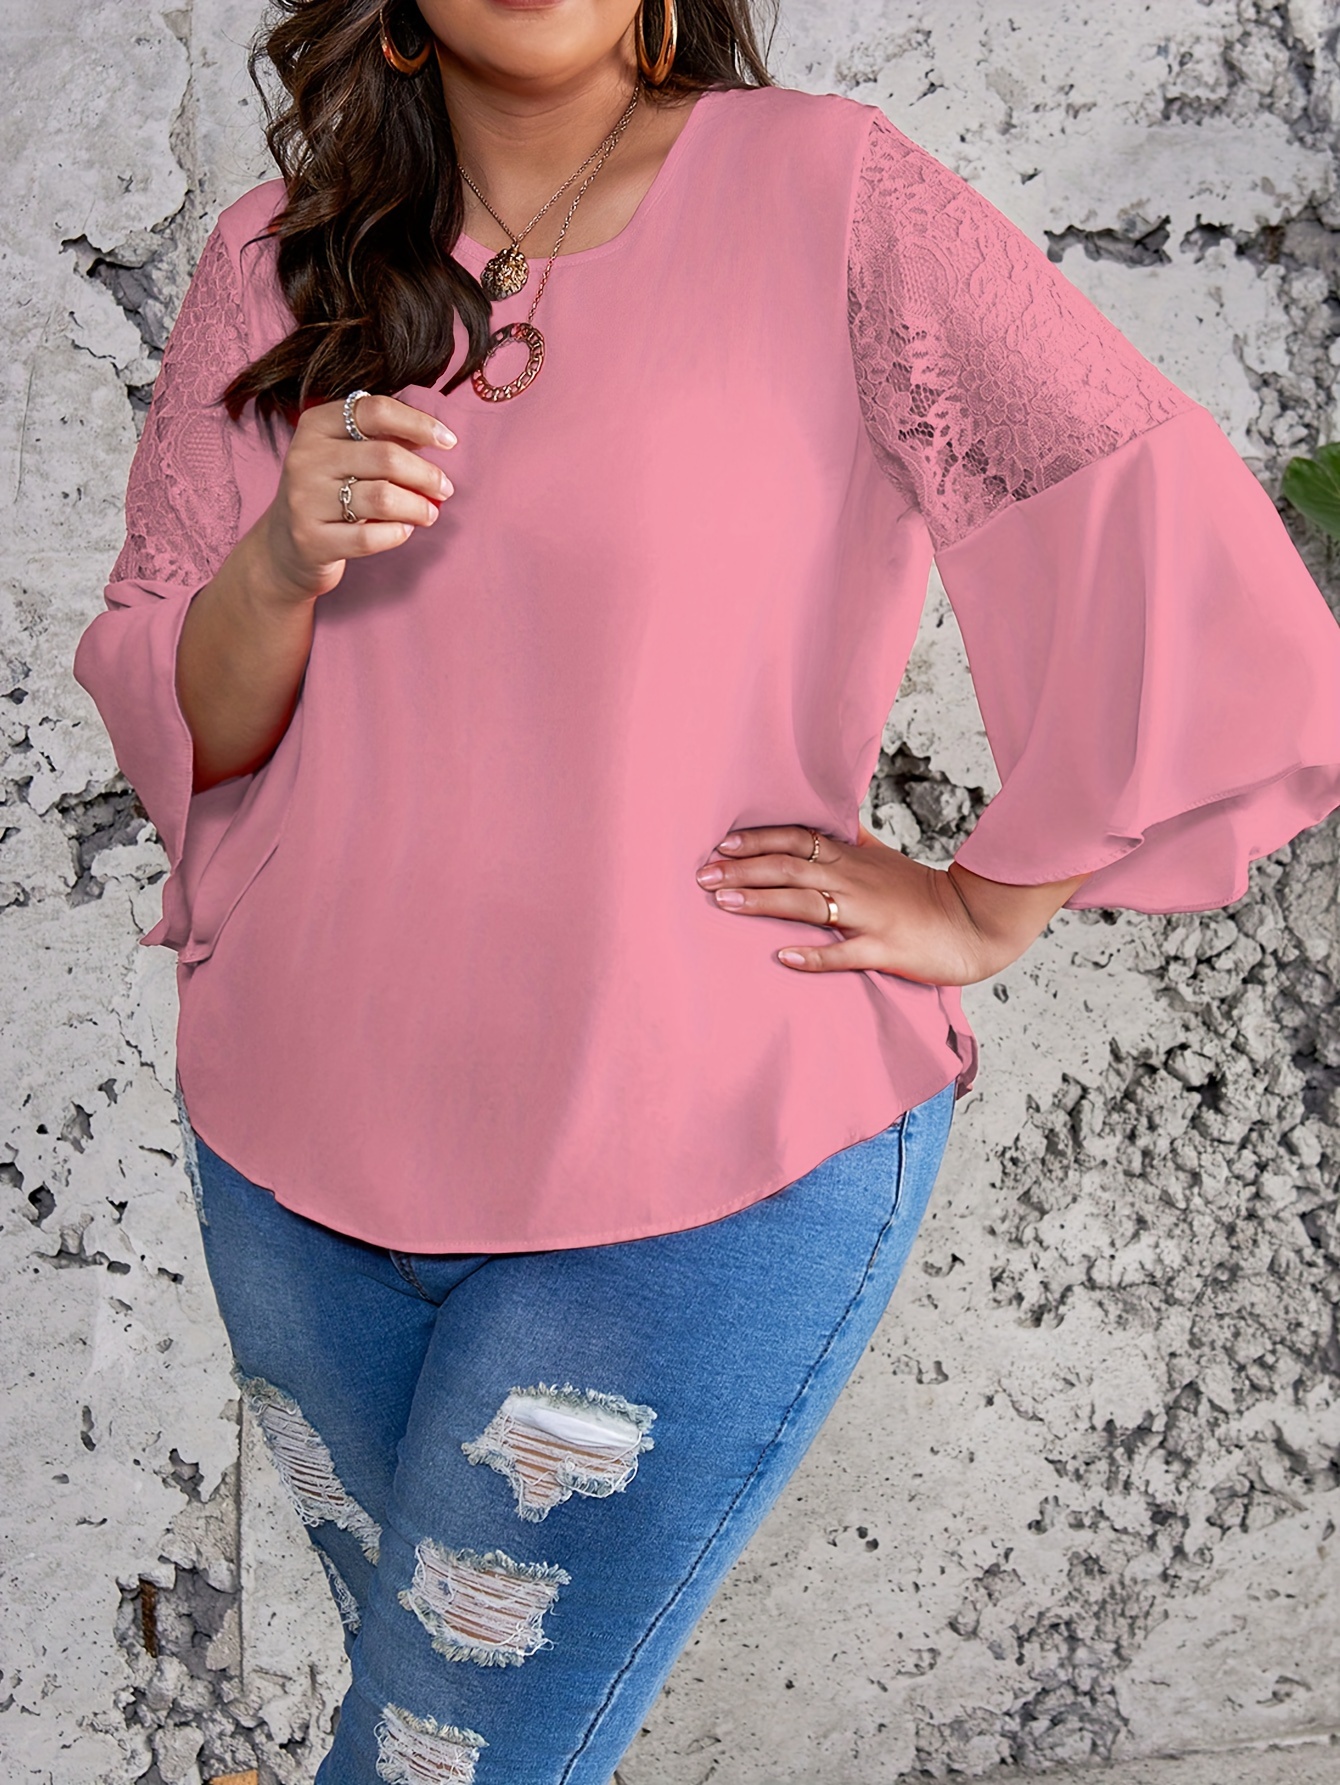 BNWT Torrid Plus Size 2 (18/20) Super Soft Pink Lace Bell Sleeve V-Neck Top